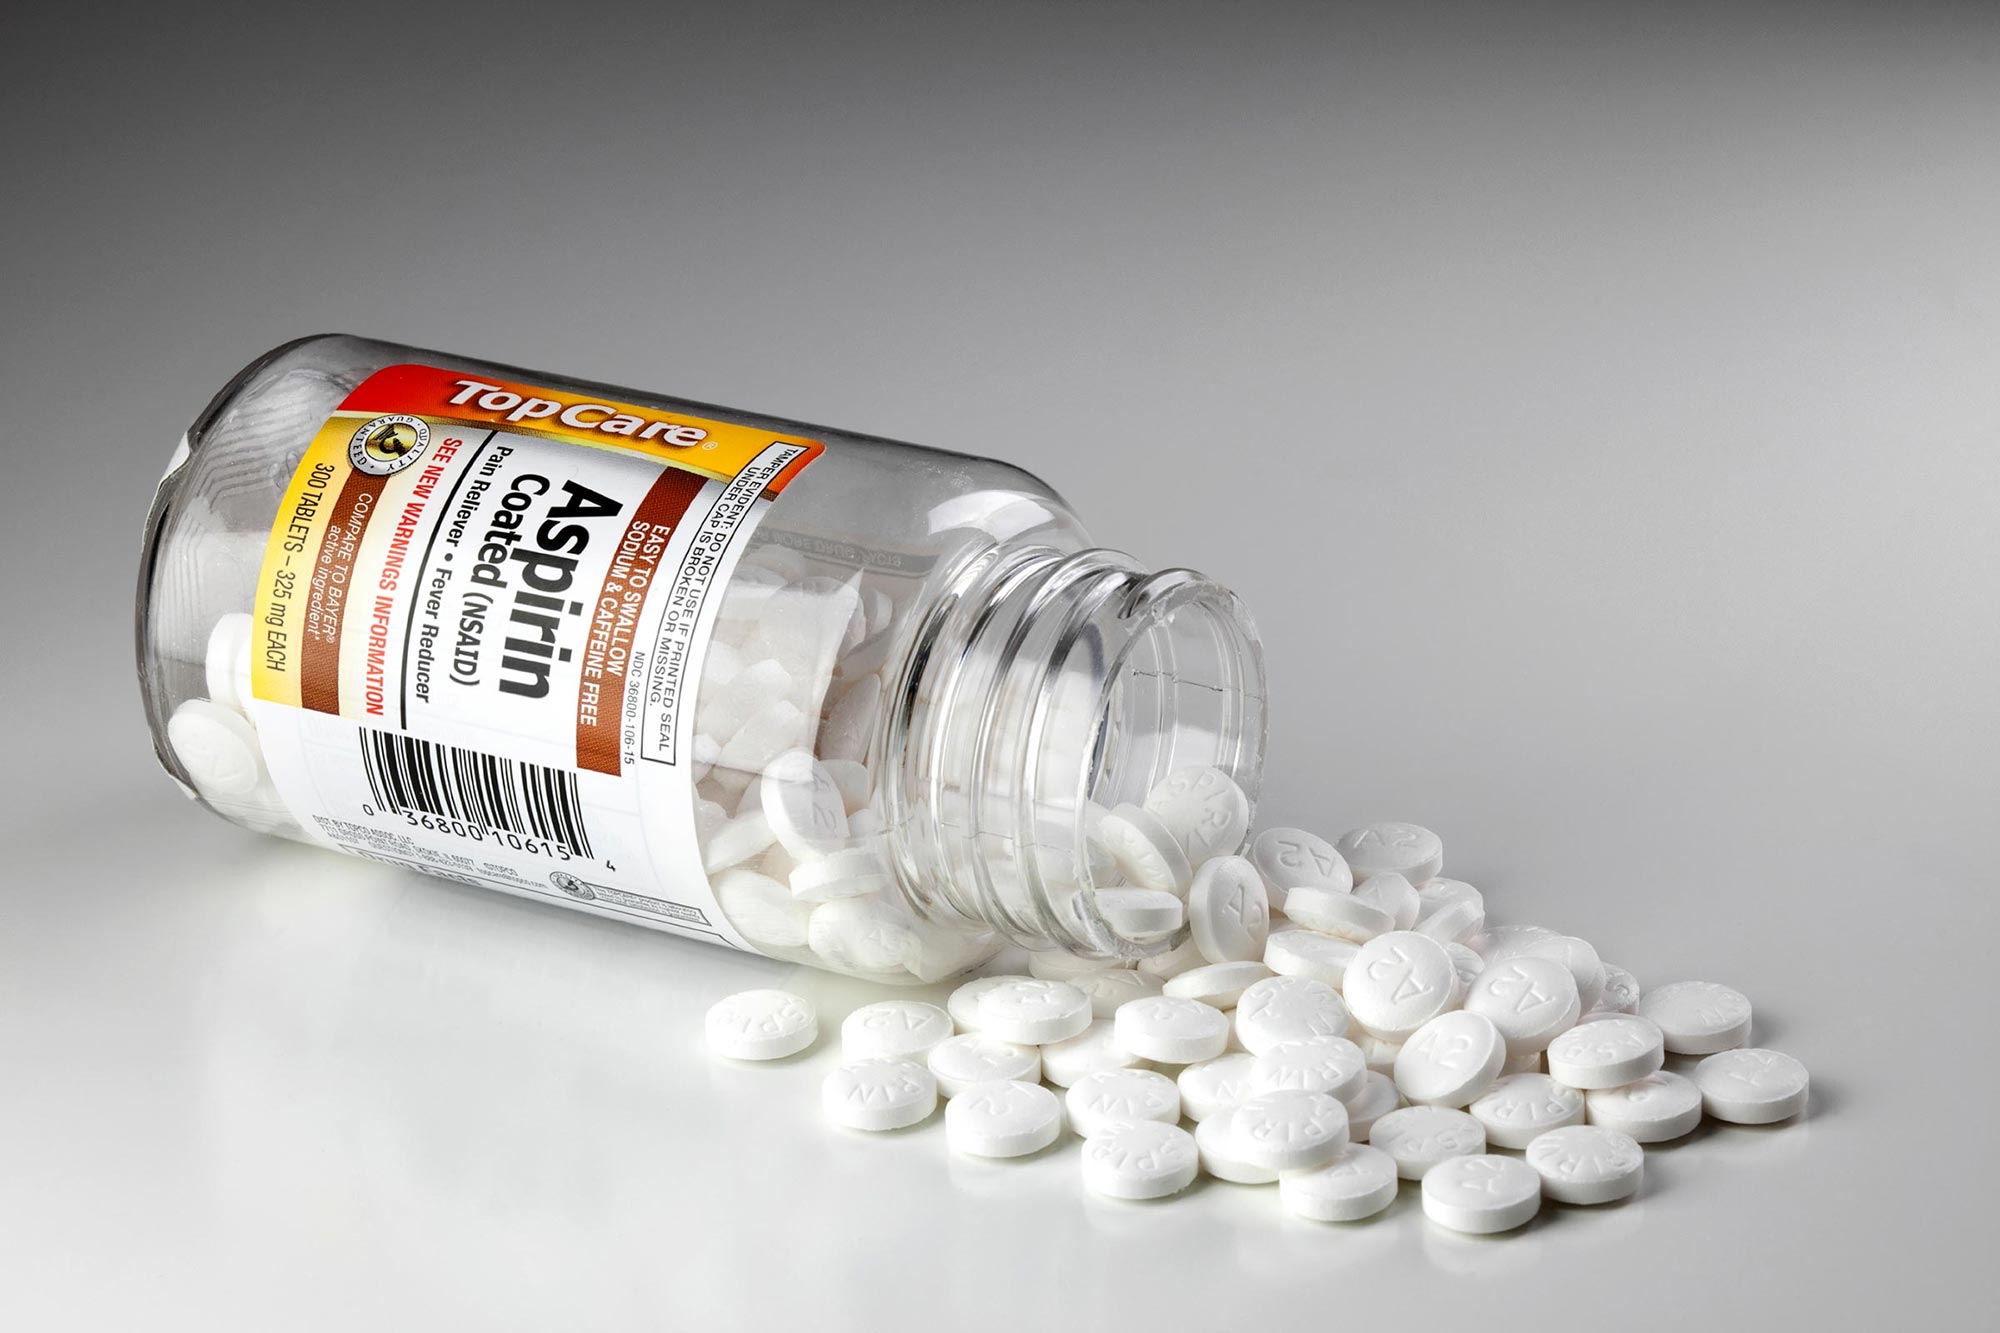 Aspirin Use Significantly Reduces Risk of Death in Hospitalized COVID-19 Patients - SciTechDaily